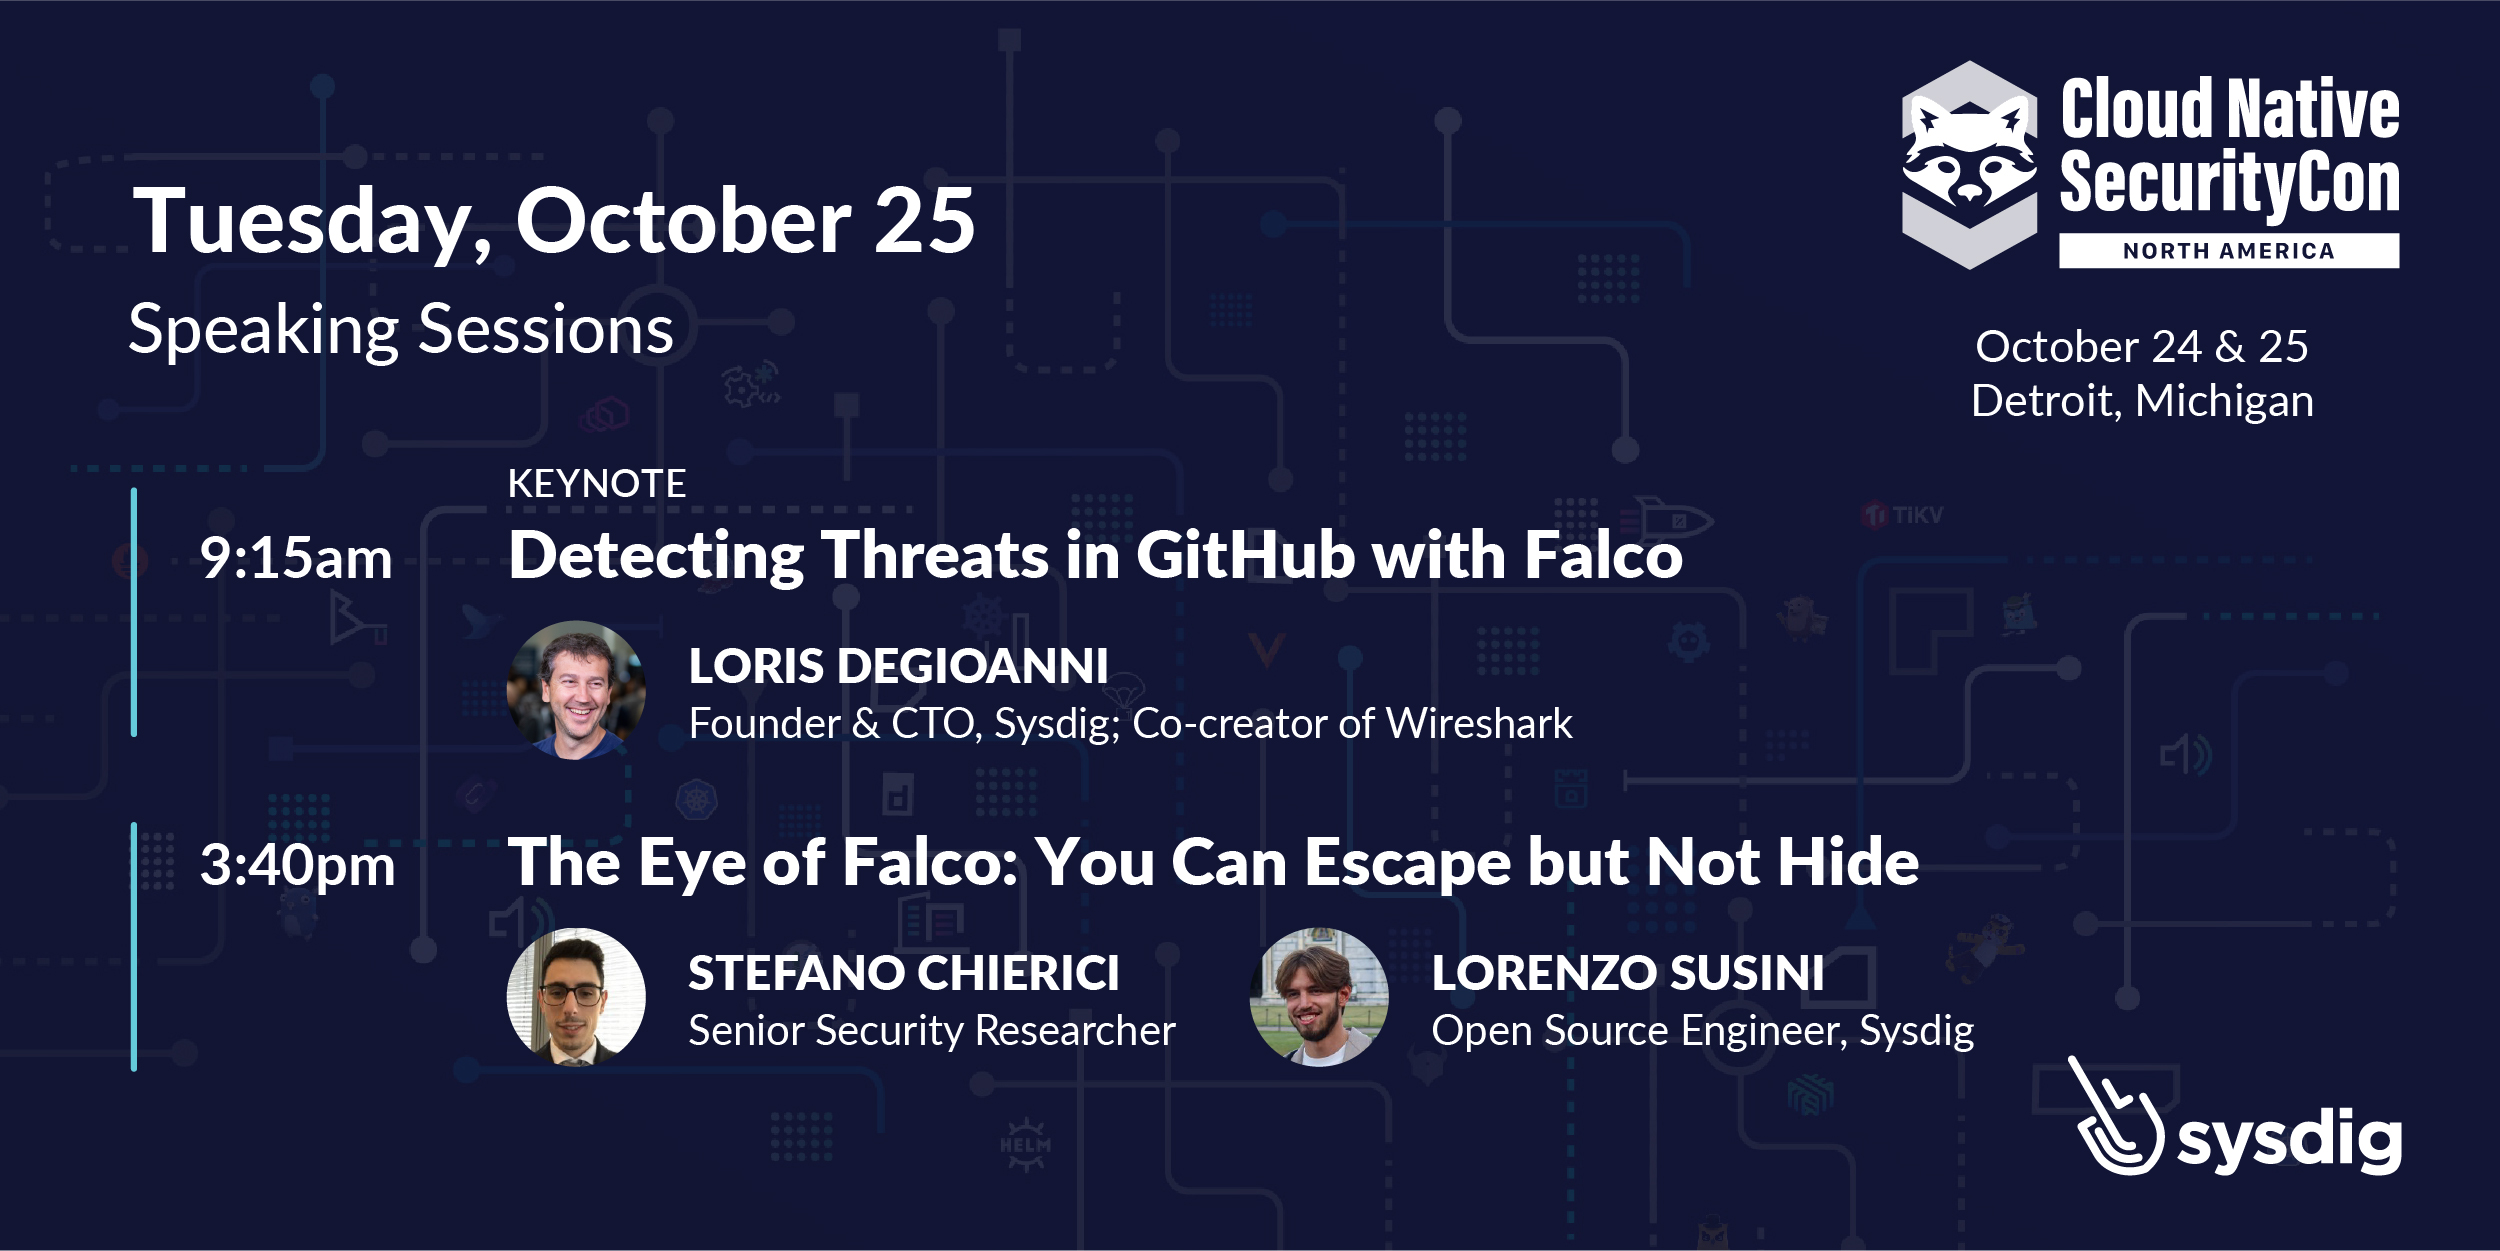 Cloud Native Con Speaker Card: Tuesday, Oct. 25 - Detecting Threats in GitHub with Falco at 9.15 am, and The Eye of Falco: You can escape but not hide, at 3:40 pm